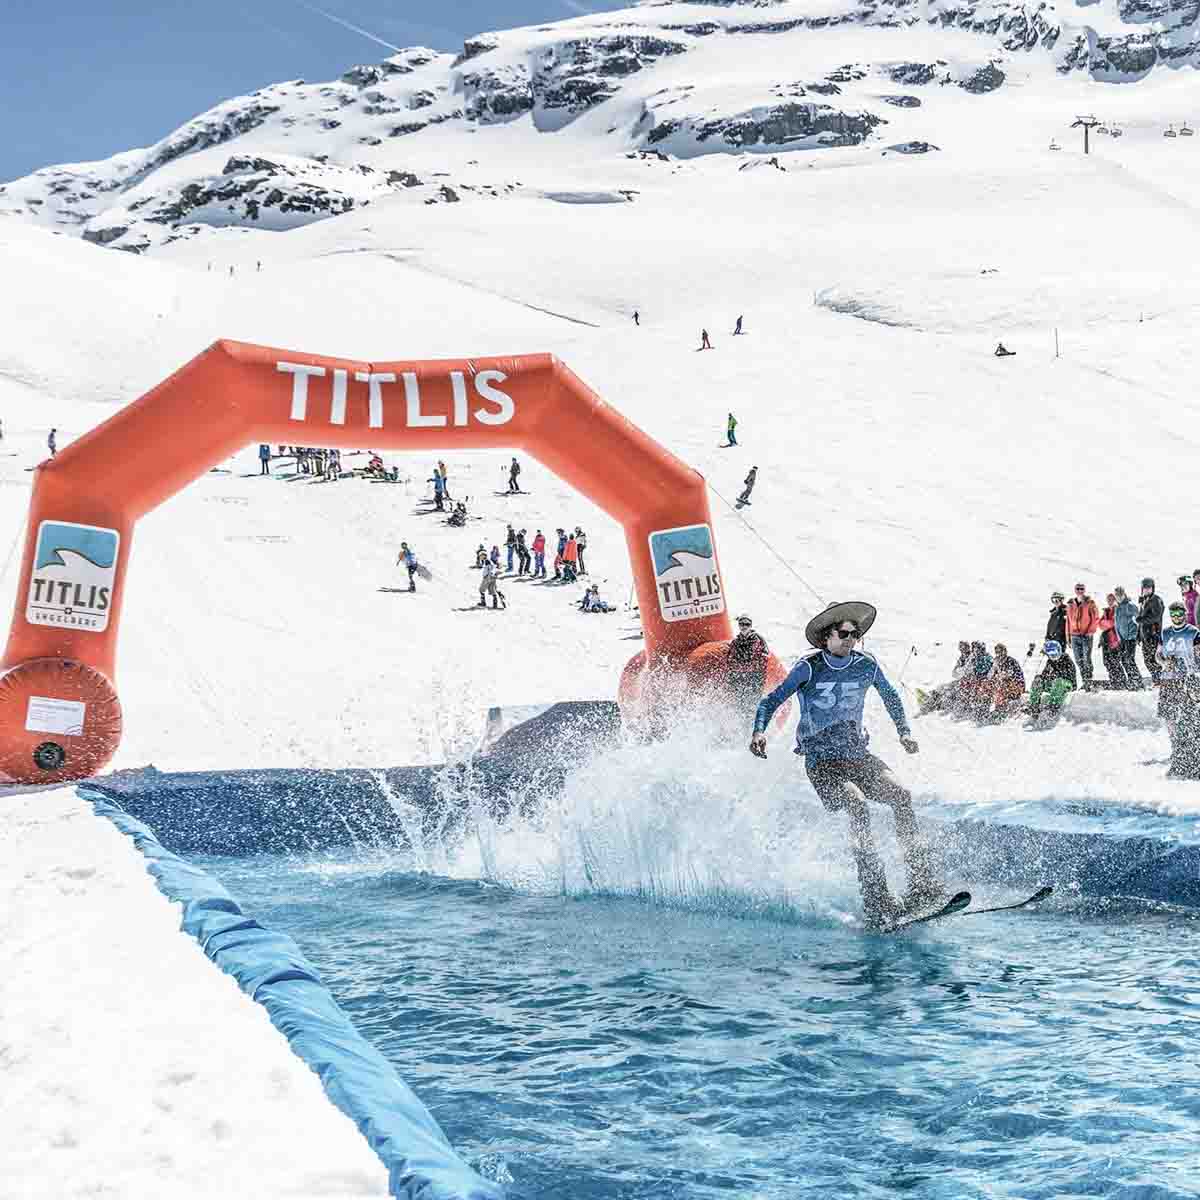 water skimming shenanigans at the top of a ski area, surrounded by white piste and spectators as a man in shorts and a panama hat skims across water on skis